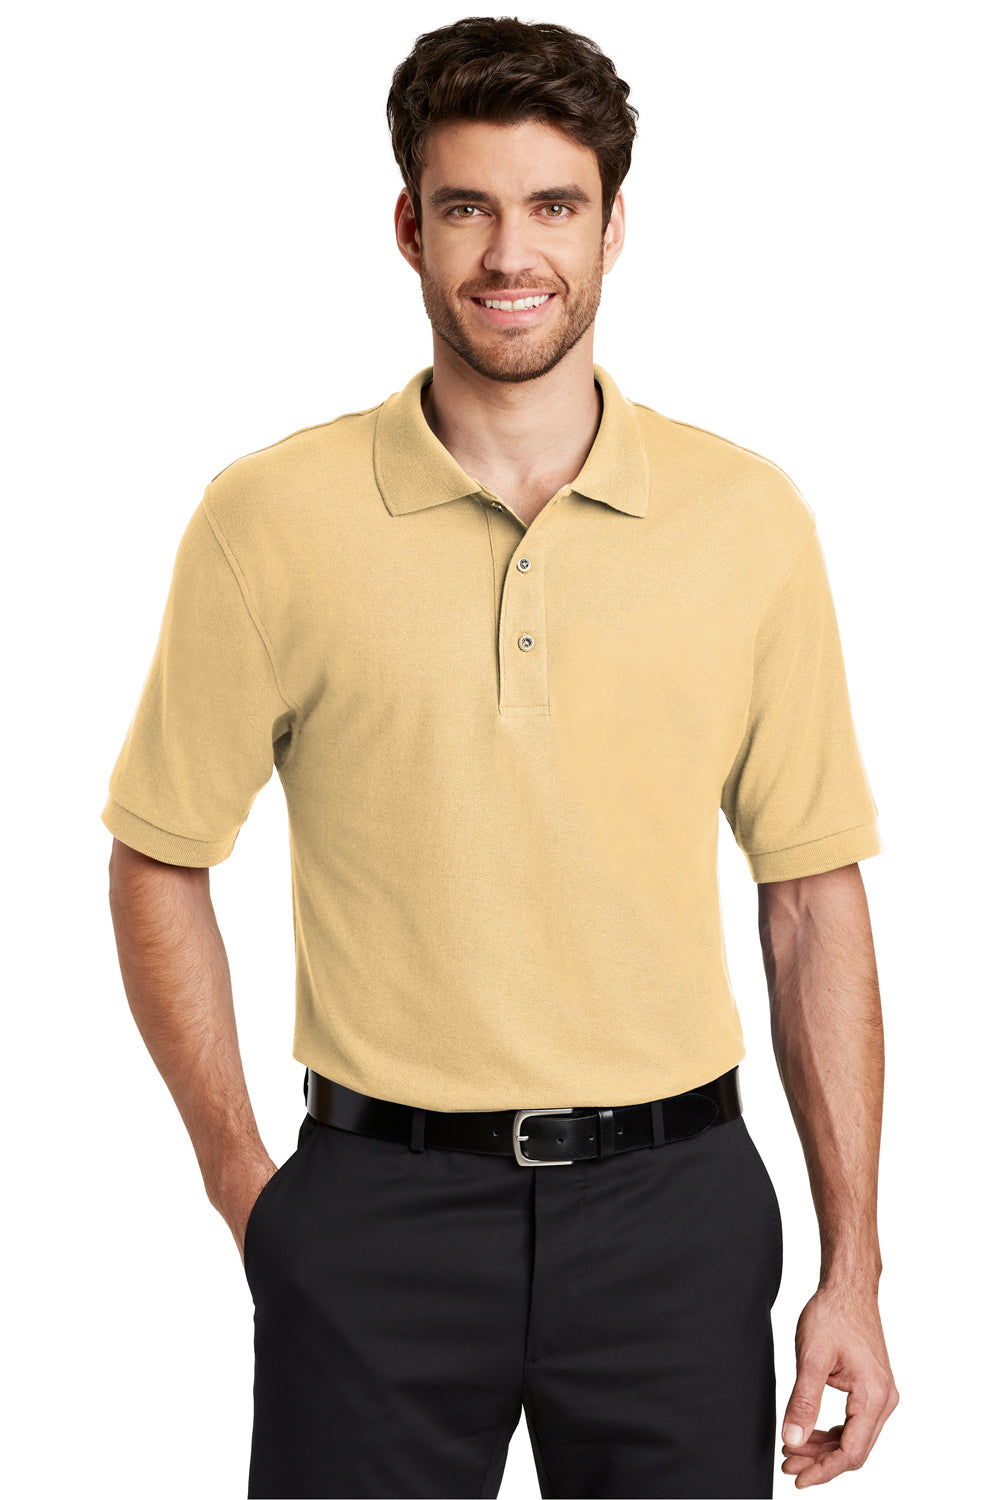 Port Authority K500 Mens Silk Touch Wrinkle Resistant Short Sleeve Polo Shirt Yellow Front